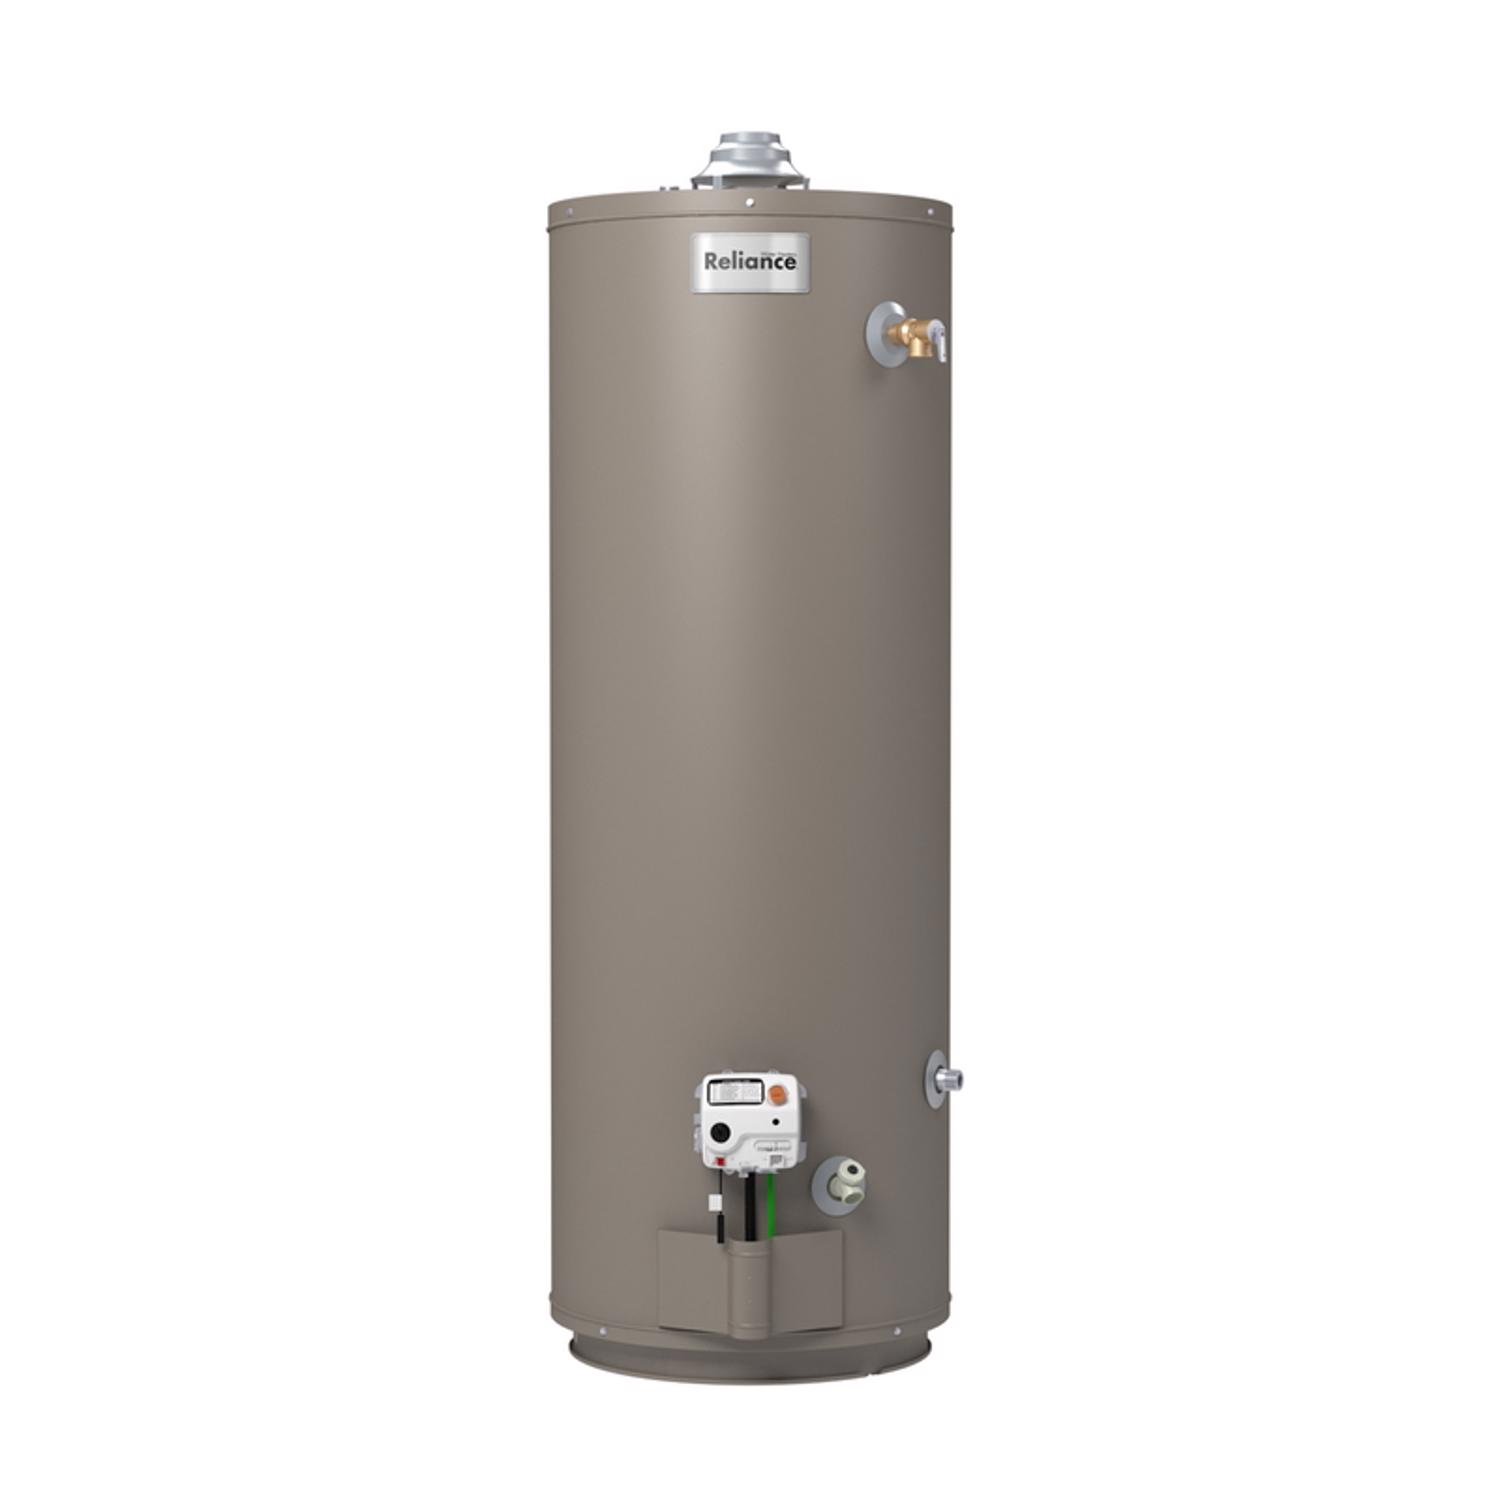 Reliance 40 gal 35500 BTU Natural Gas/Propane Mobile Home Water Heater -  6-40-NOMT